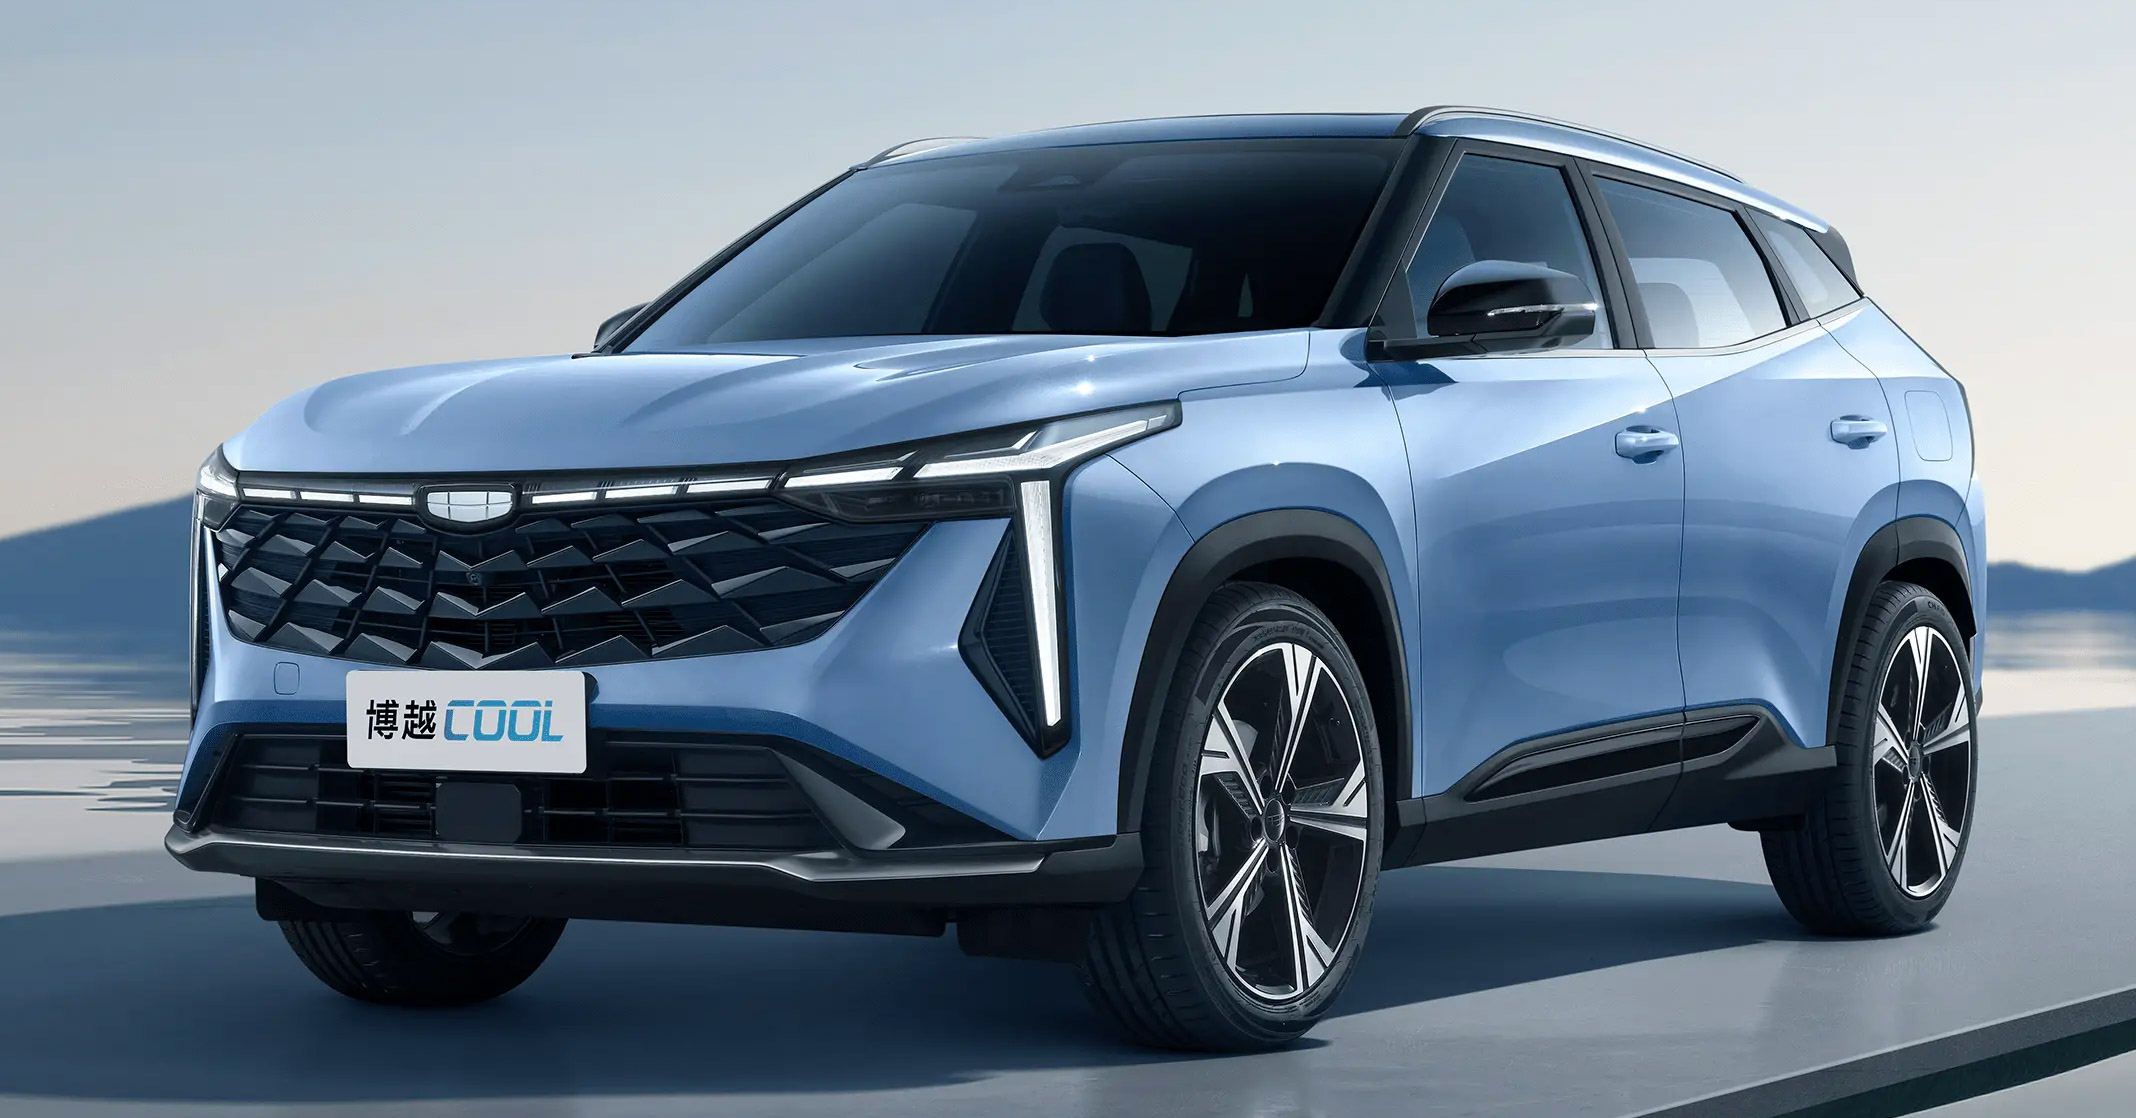 Geely Boyue Cool revealed in China - sized close to the Proton X70; 1.5T, 7DCT; Starburst Vision design - paultan.org